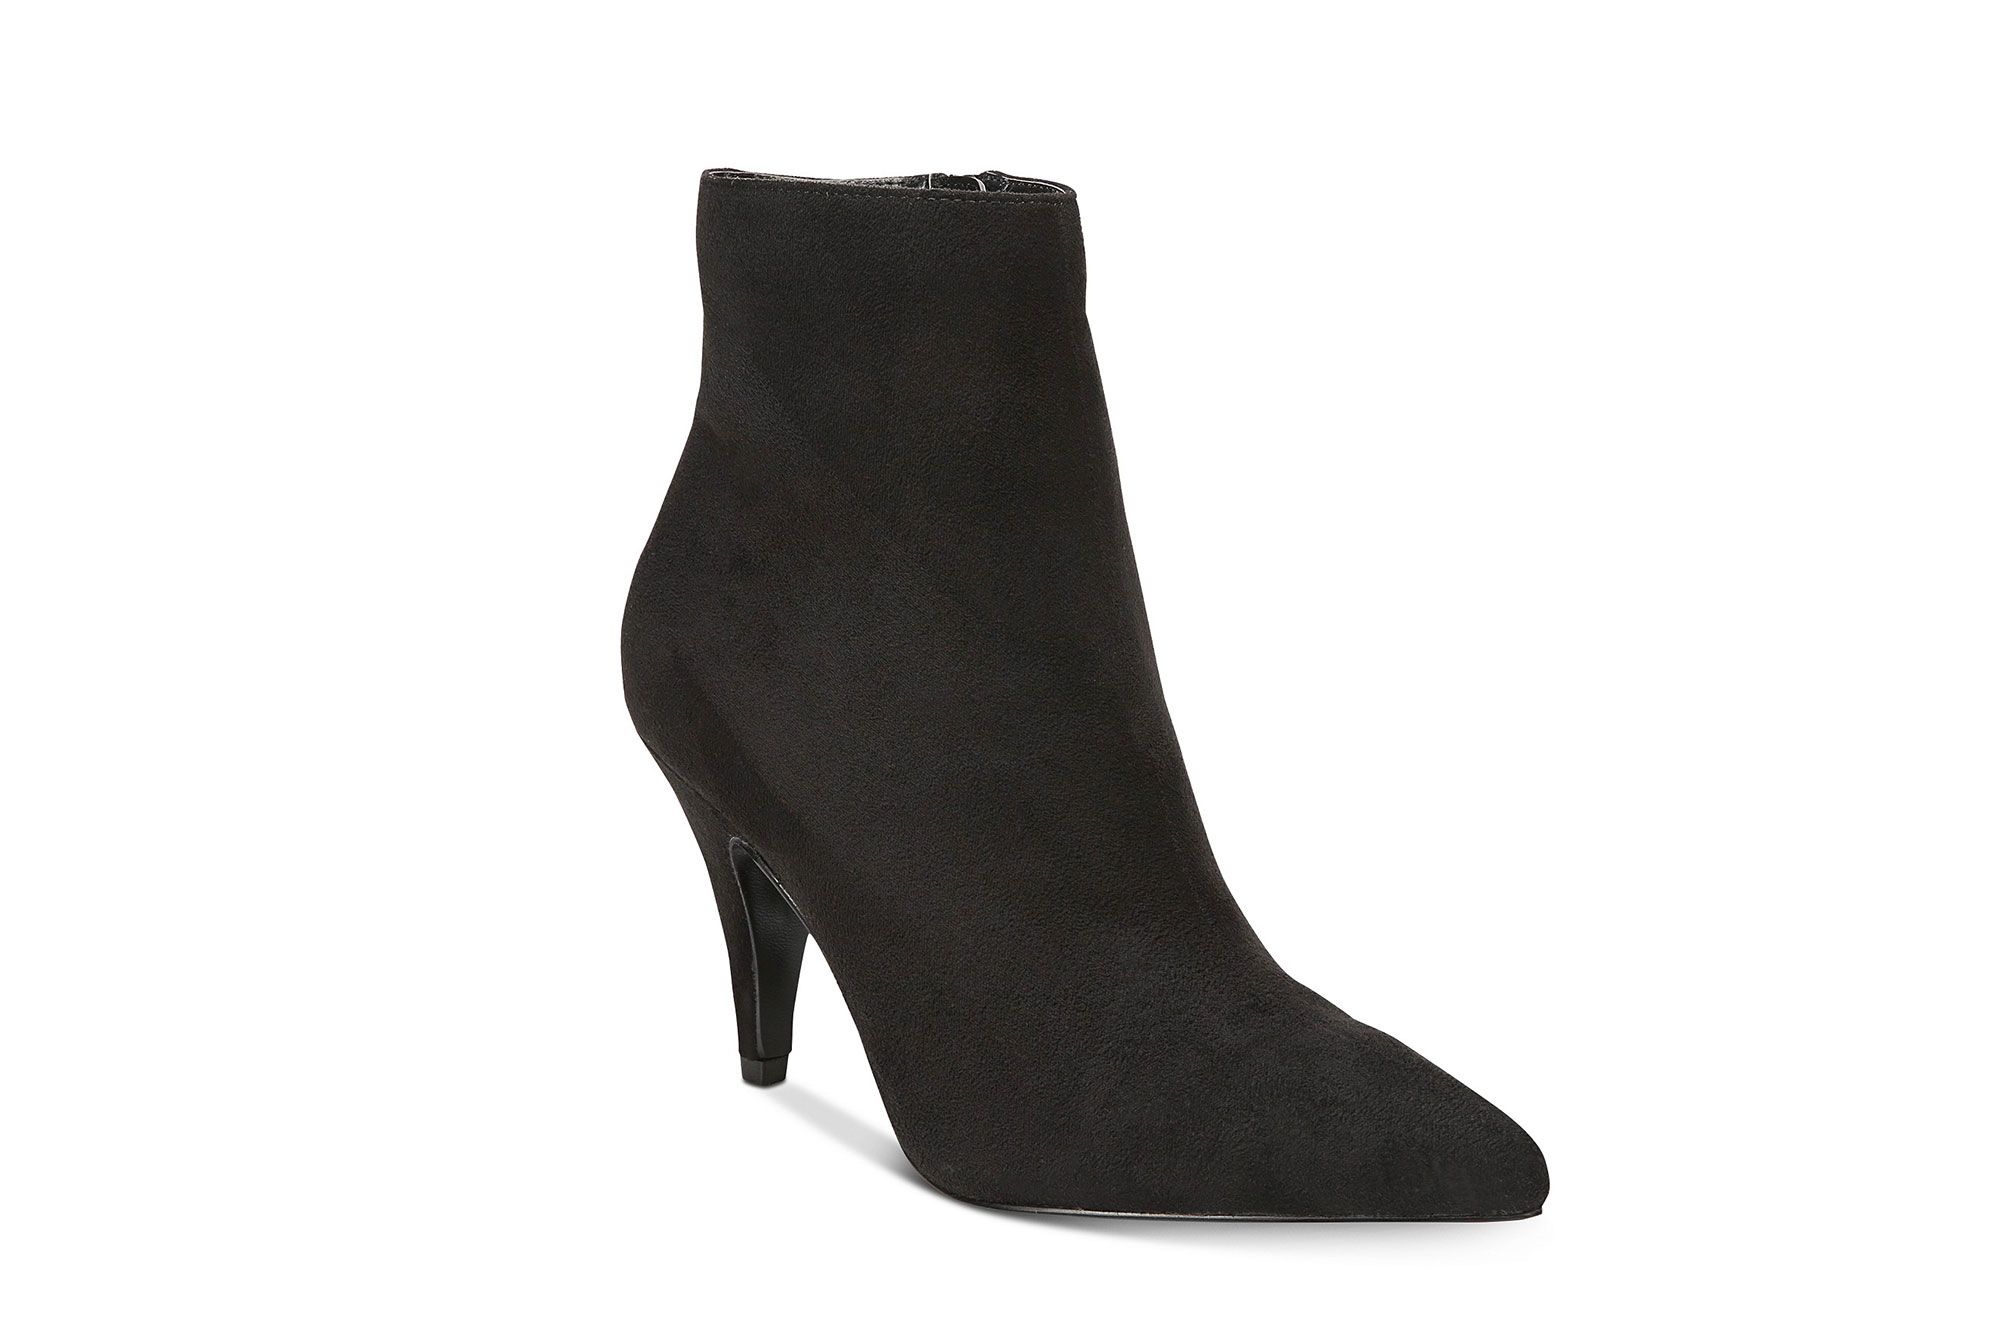 Here is the Best Black Friday Sale on Booties Available at Macy's